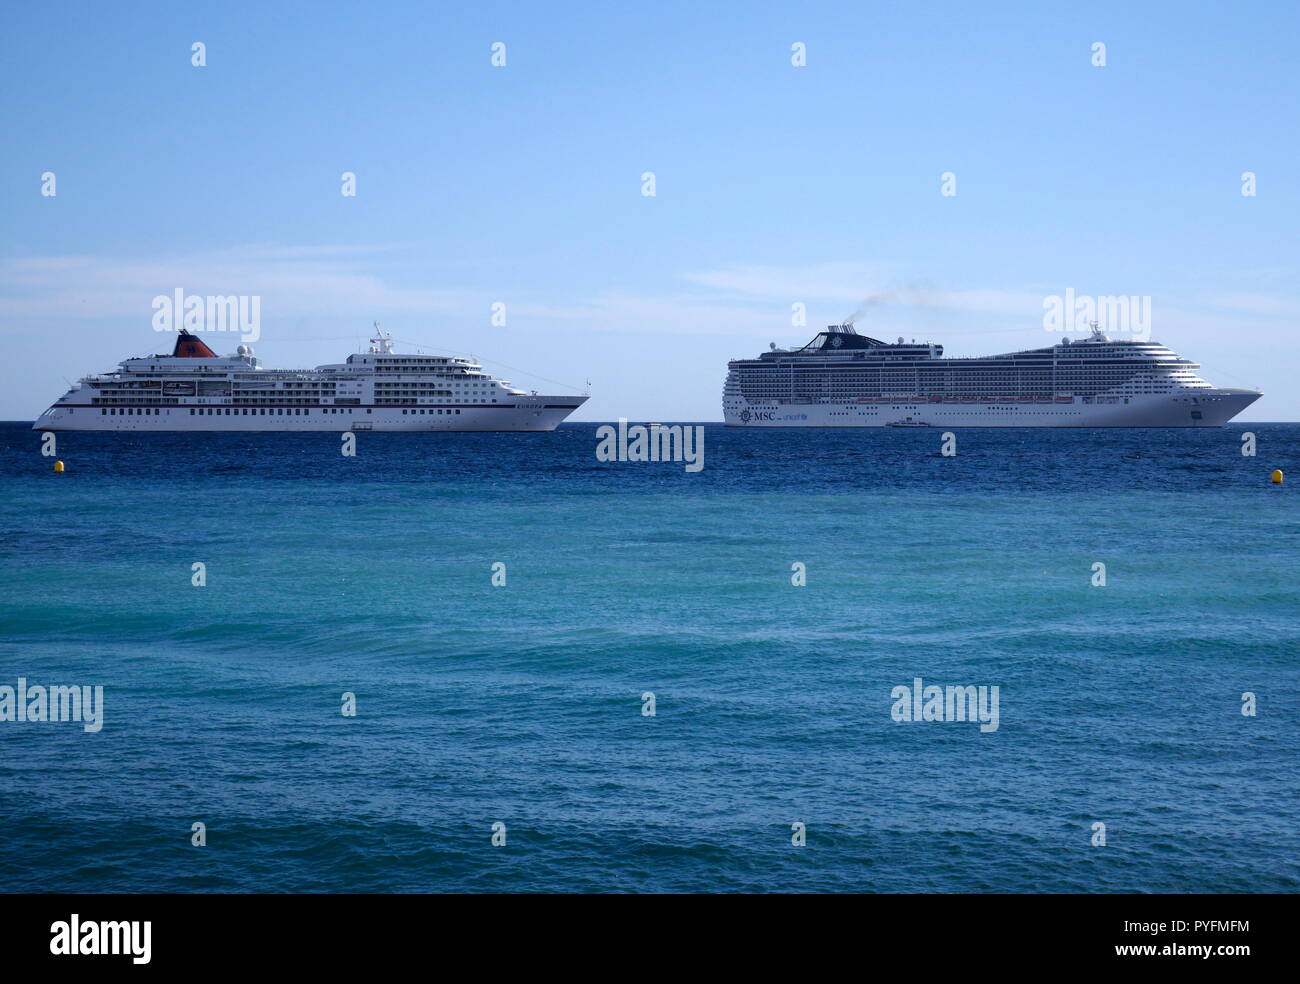 AJAXNETPHOTO. 2018. CANNES, FRANCE. - COTE D'AZUR RESORT - THE HAPAG LLOYD CRUISE LINER EUROPA (L) AND MSC FANTASIA ANCHORED IN THE BAY. PHOTO:JONATHAN EASTLAND/AJAX REF:GX8_180310_771 Stock Photo